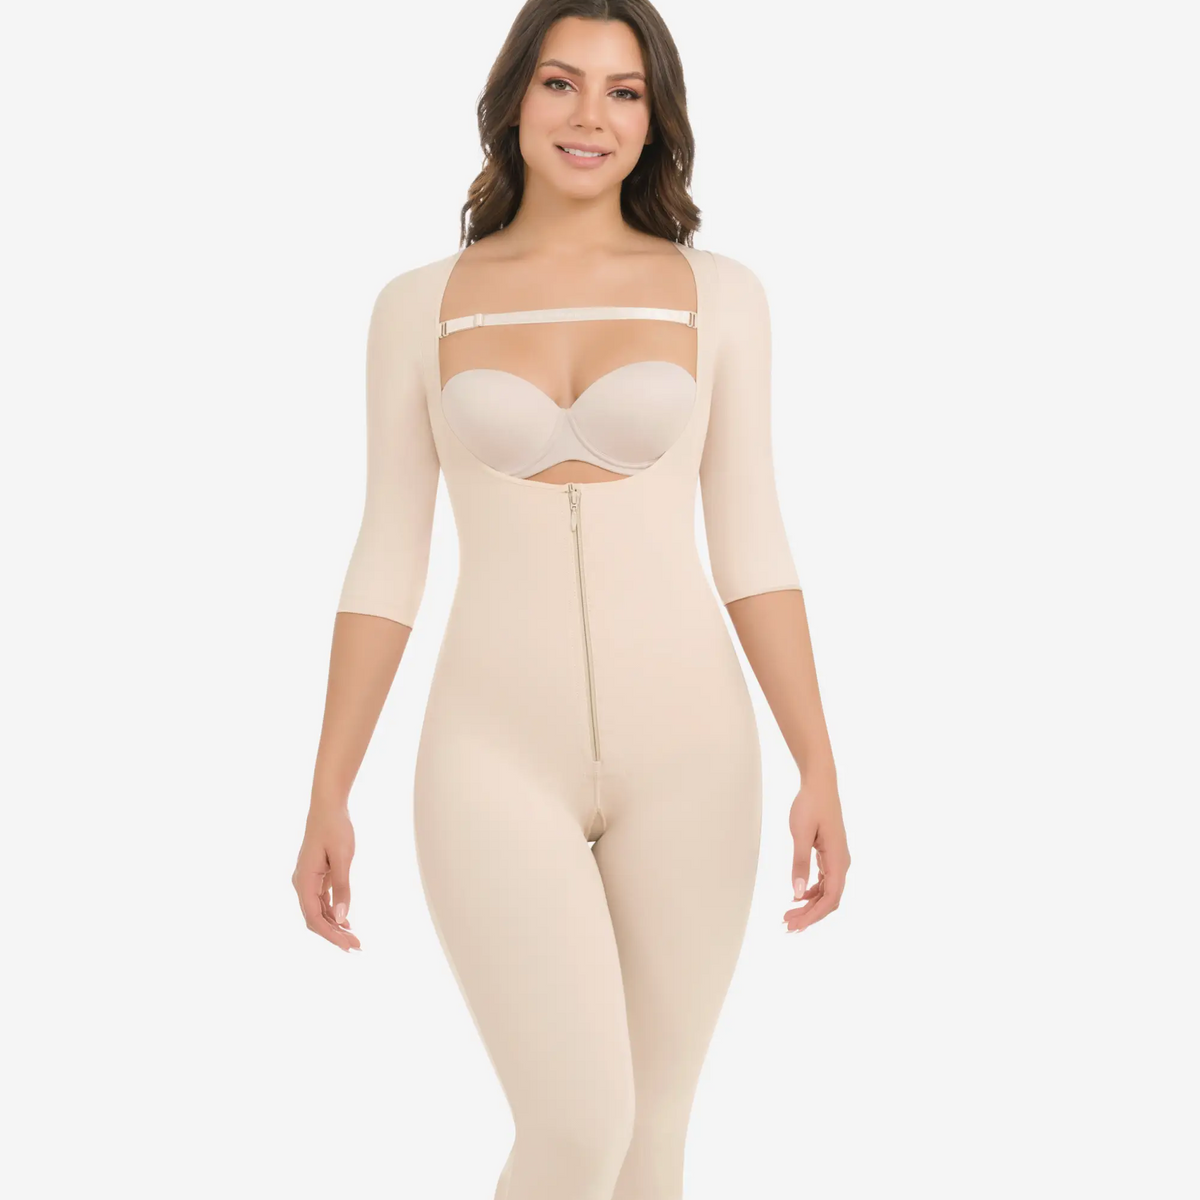 Wholesale Body Shaper clips inside for post-operative wear and removab